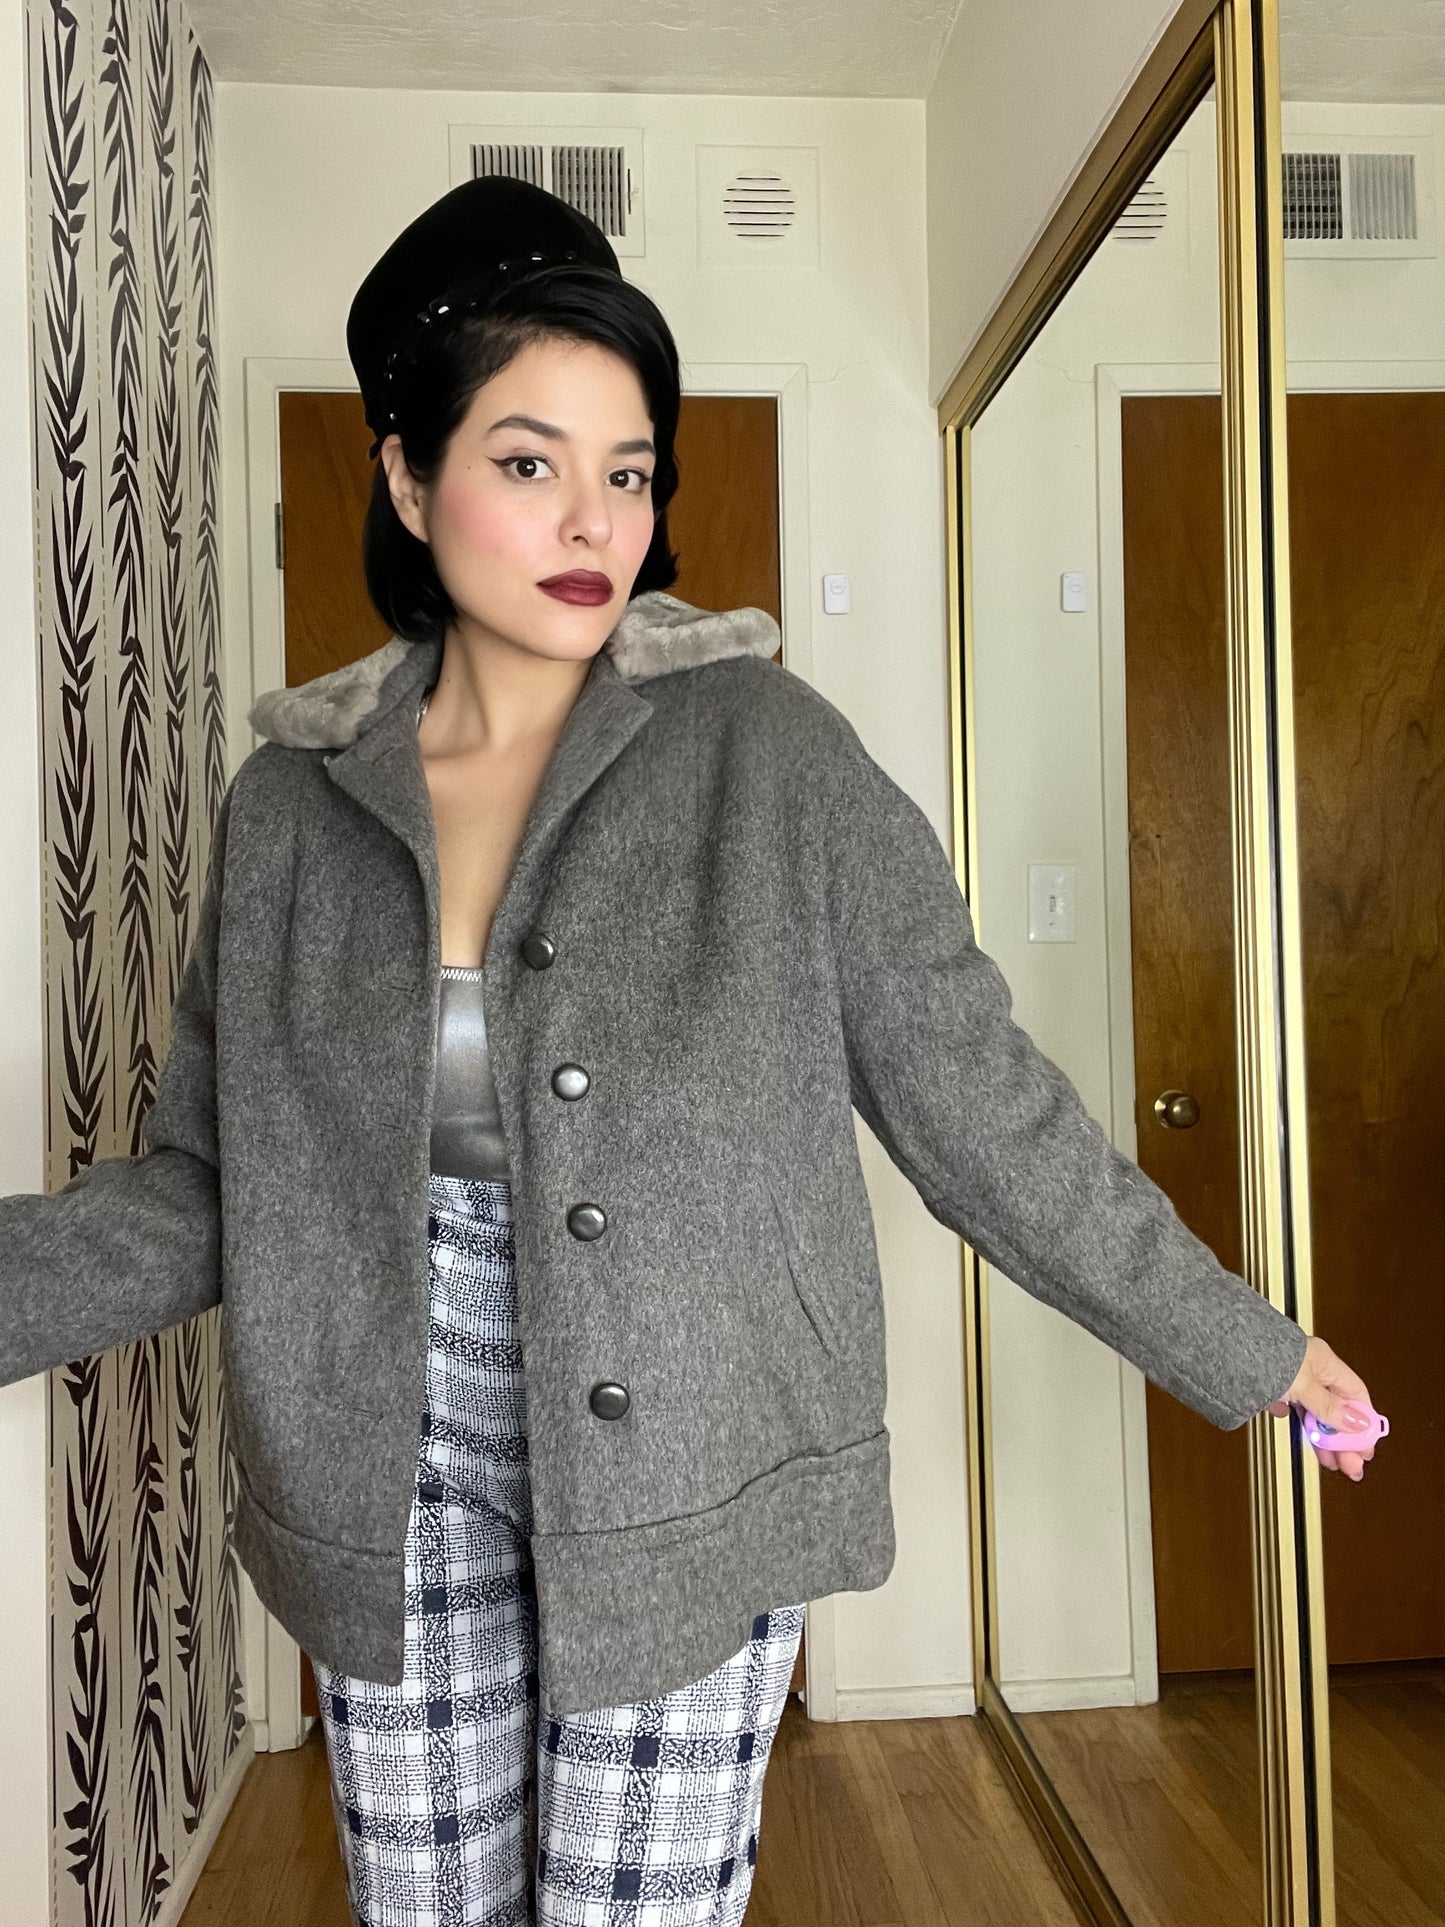 Vintage 50s 60s Charcoal Grey Coat Jacket with Fuzzy Plush Collar Best Fits Sizes S-L